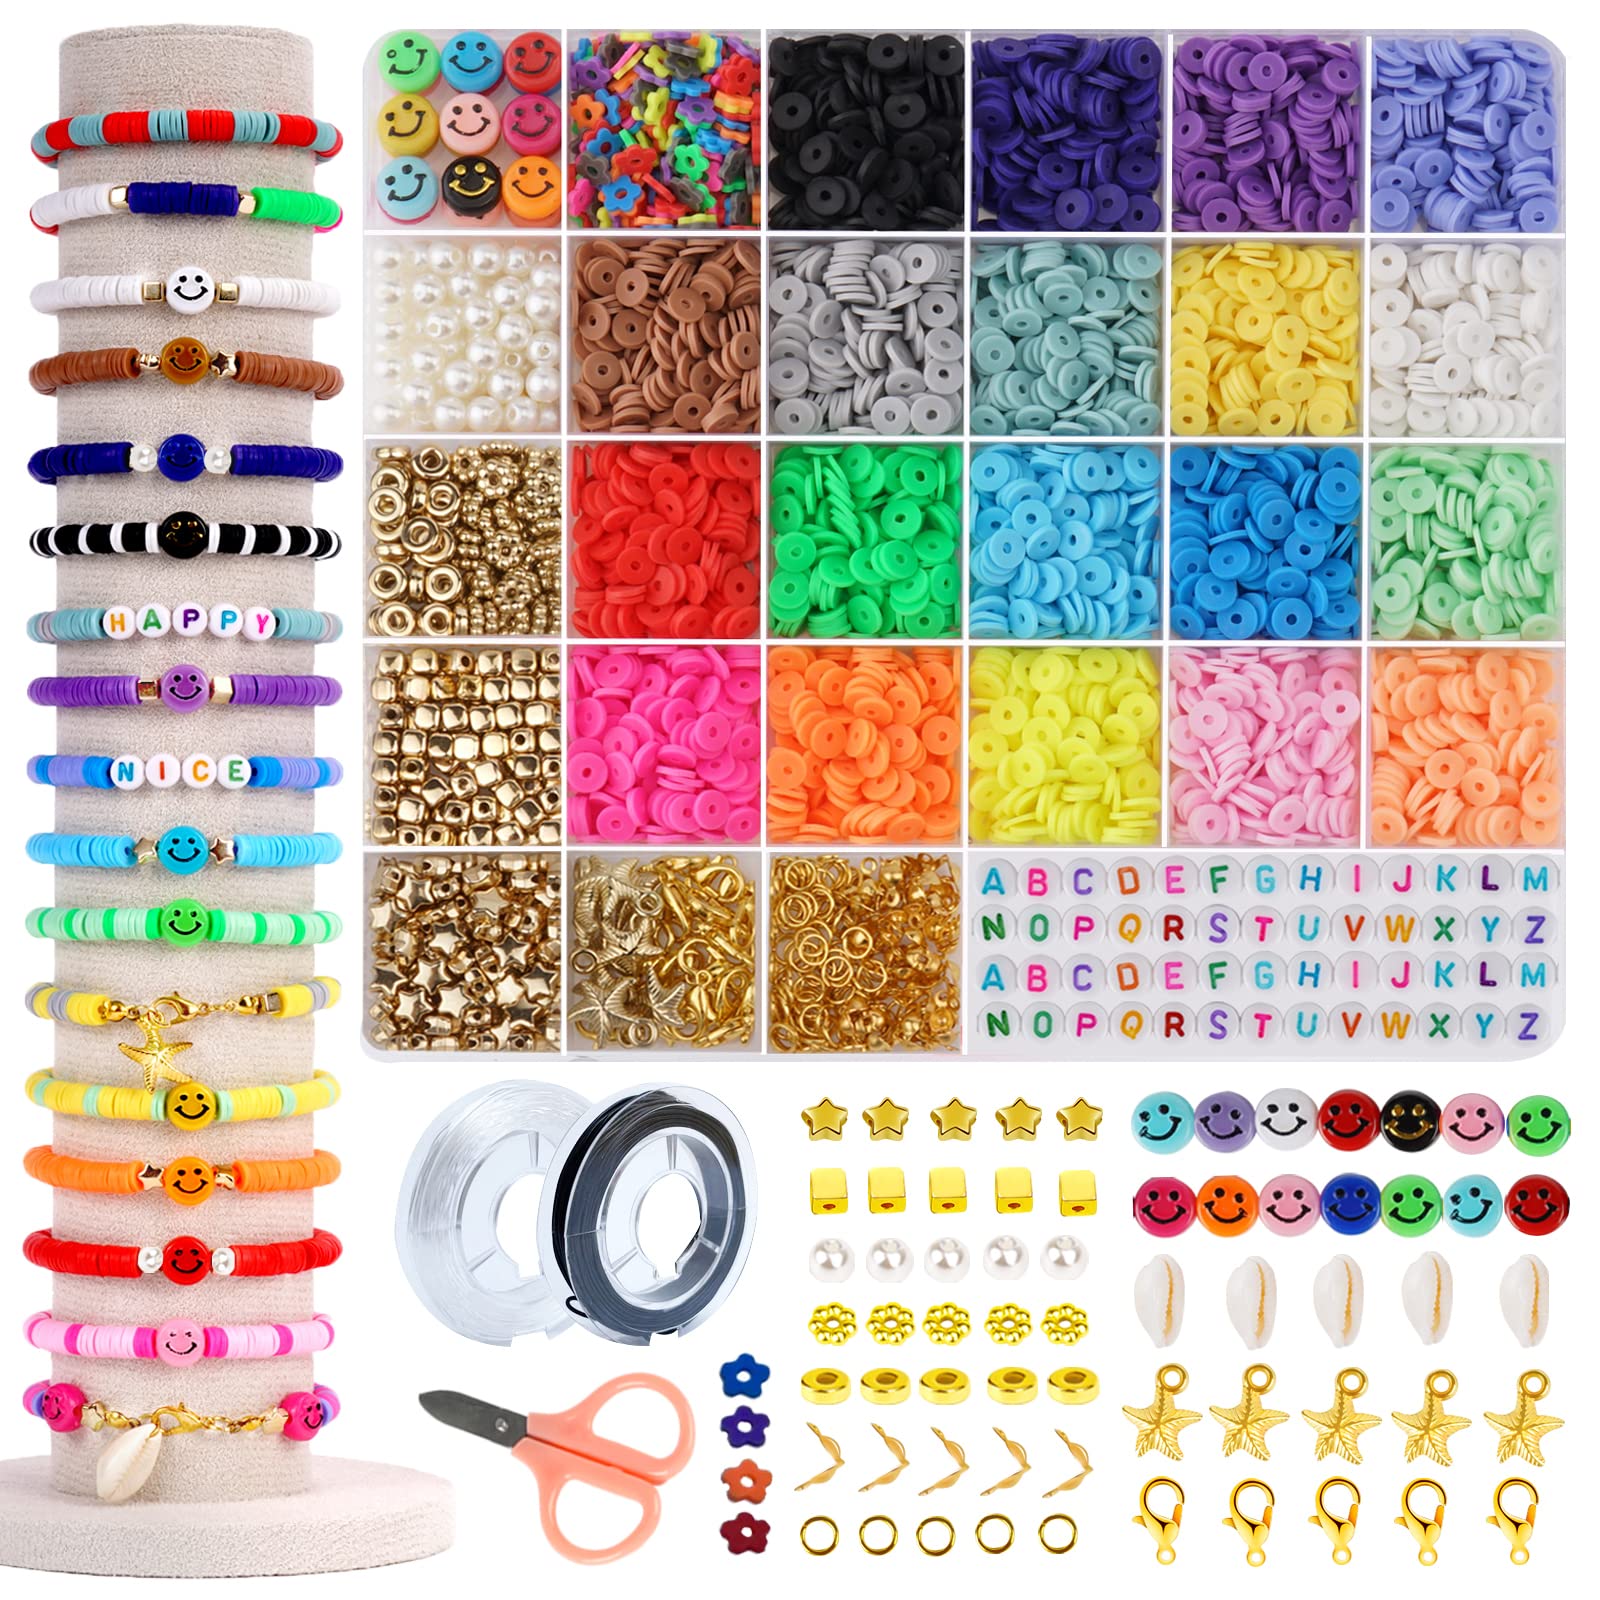 4900 Pcs Clay Beads for Bracelets Making Kit, Flat Round Polymer Clay Beads  for Jewelry Making Kit with Letter Beads and Smiley Face Beads for  Bracelets Beads w…